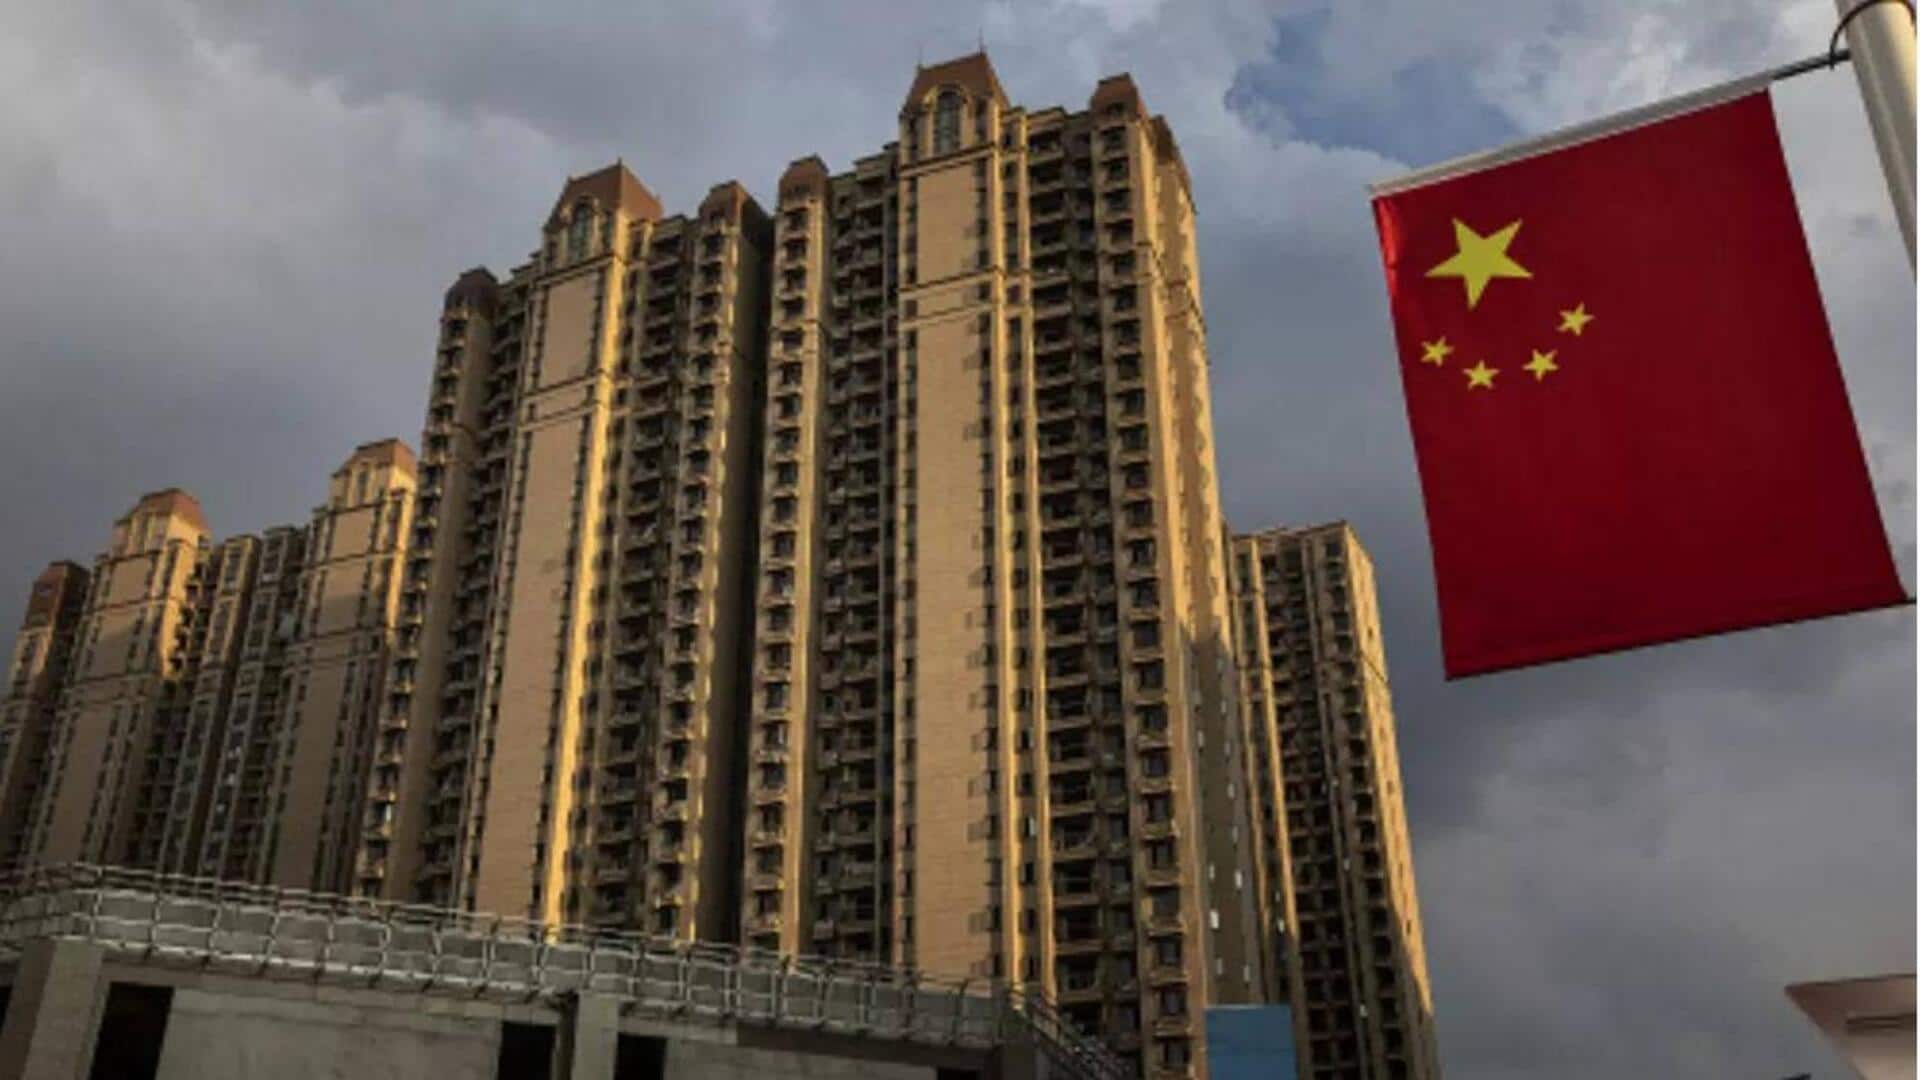 China's property sector downturn could hurt Asia Pacific, warns IMF